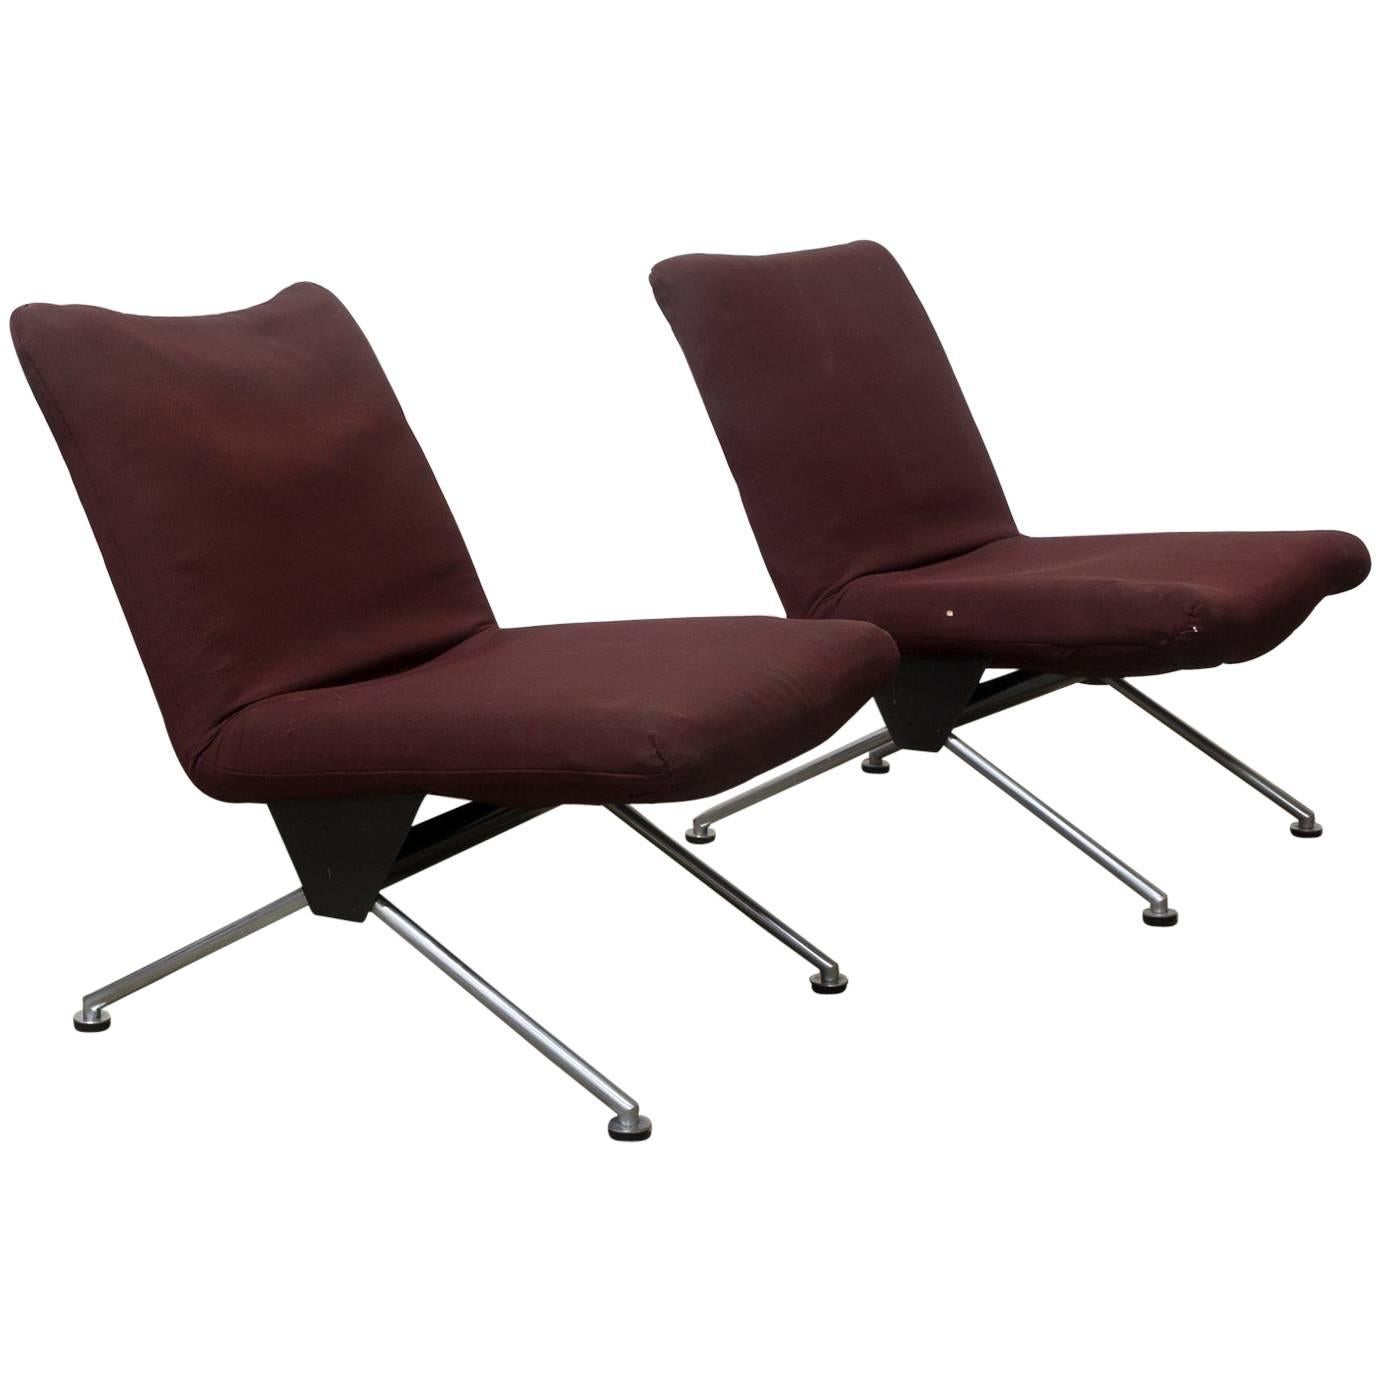 1961, Andre Cordemeyer for Gispen, Set of Two Mid-Century Dutch Easy Chairs 1432 For Sale